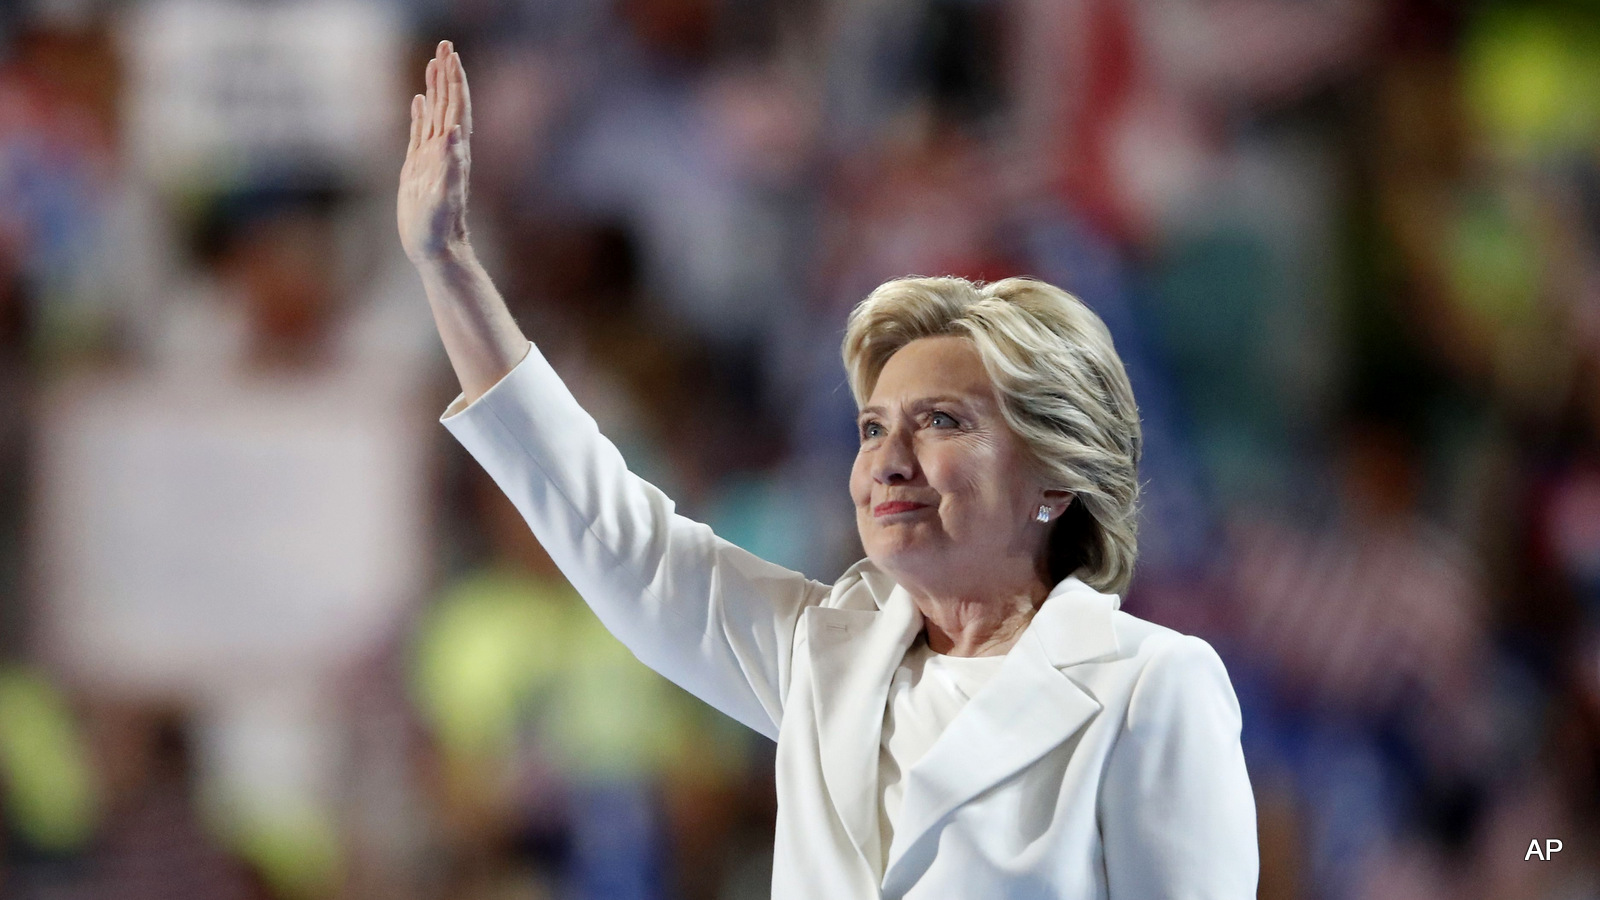 Democratic presidential nominee Hillary Clinton waves after taking the stage during the final day of the Democratic National Convention in Philadelphia , Thursday, July 28, 2016.